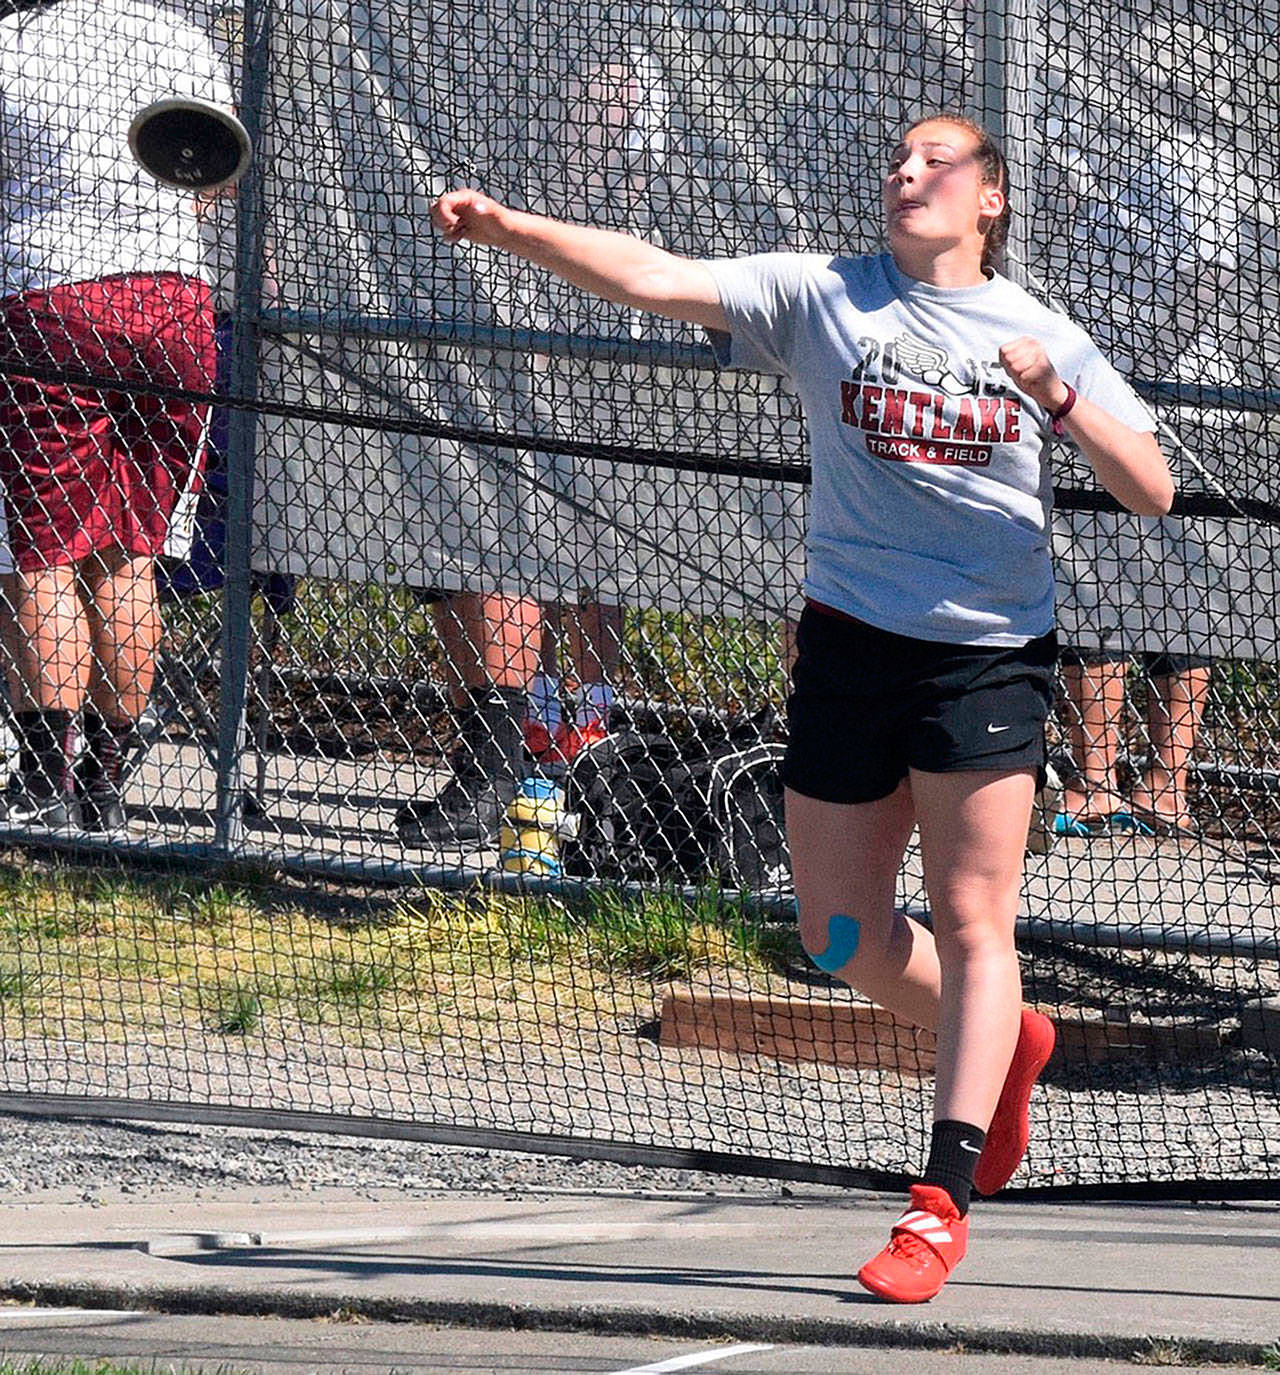 Kentlake’s Jordan Fong flings the discus, one of the throwing events she excels at. RACHEL CIAMPI, Reporter